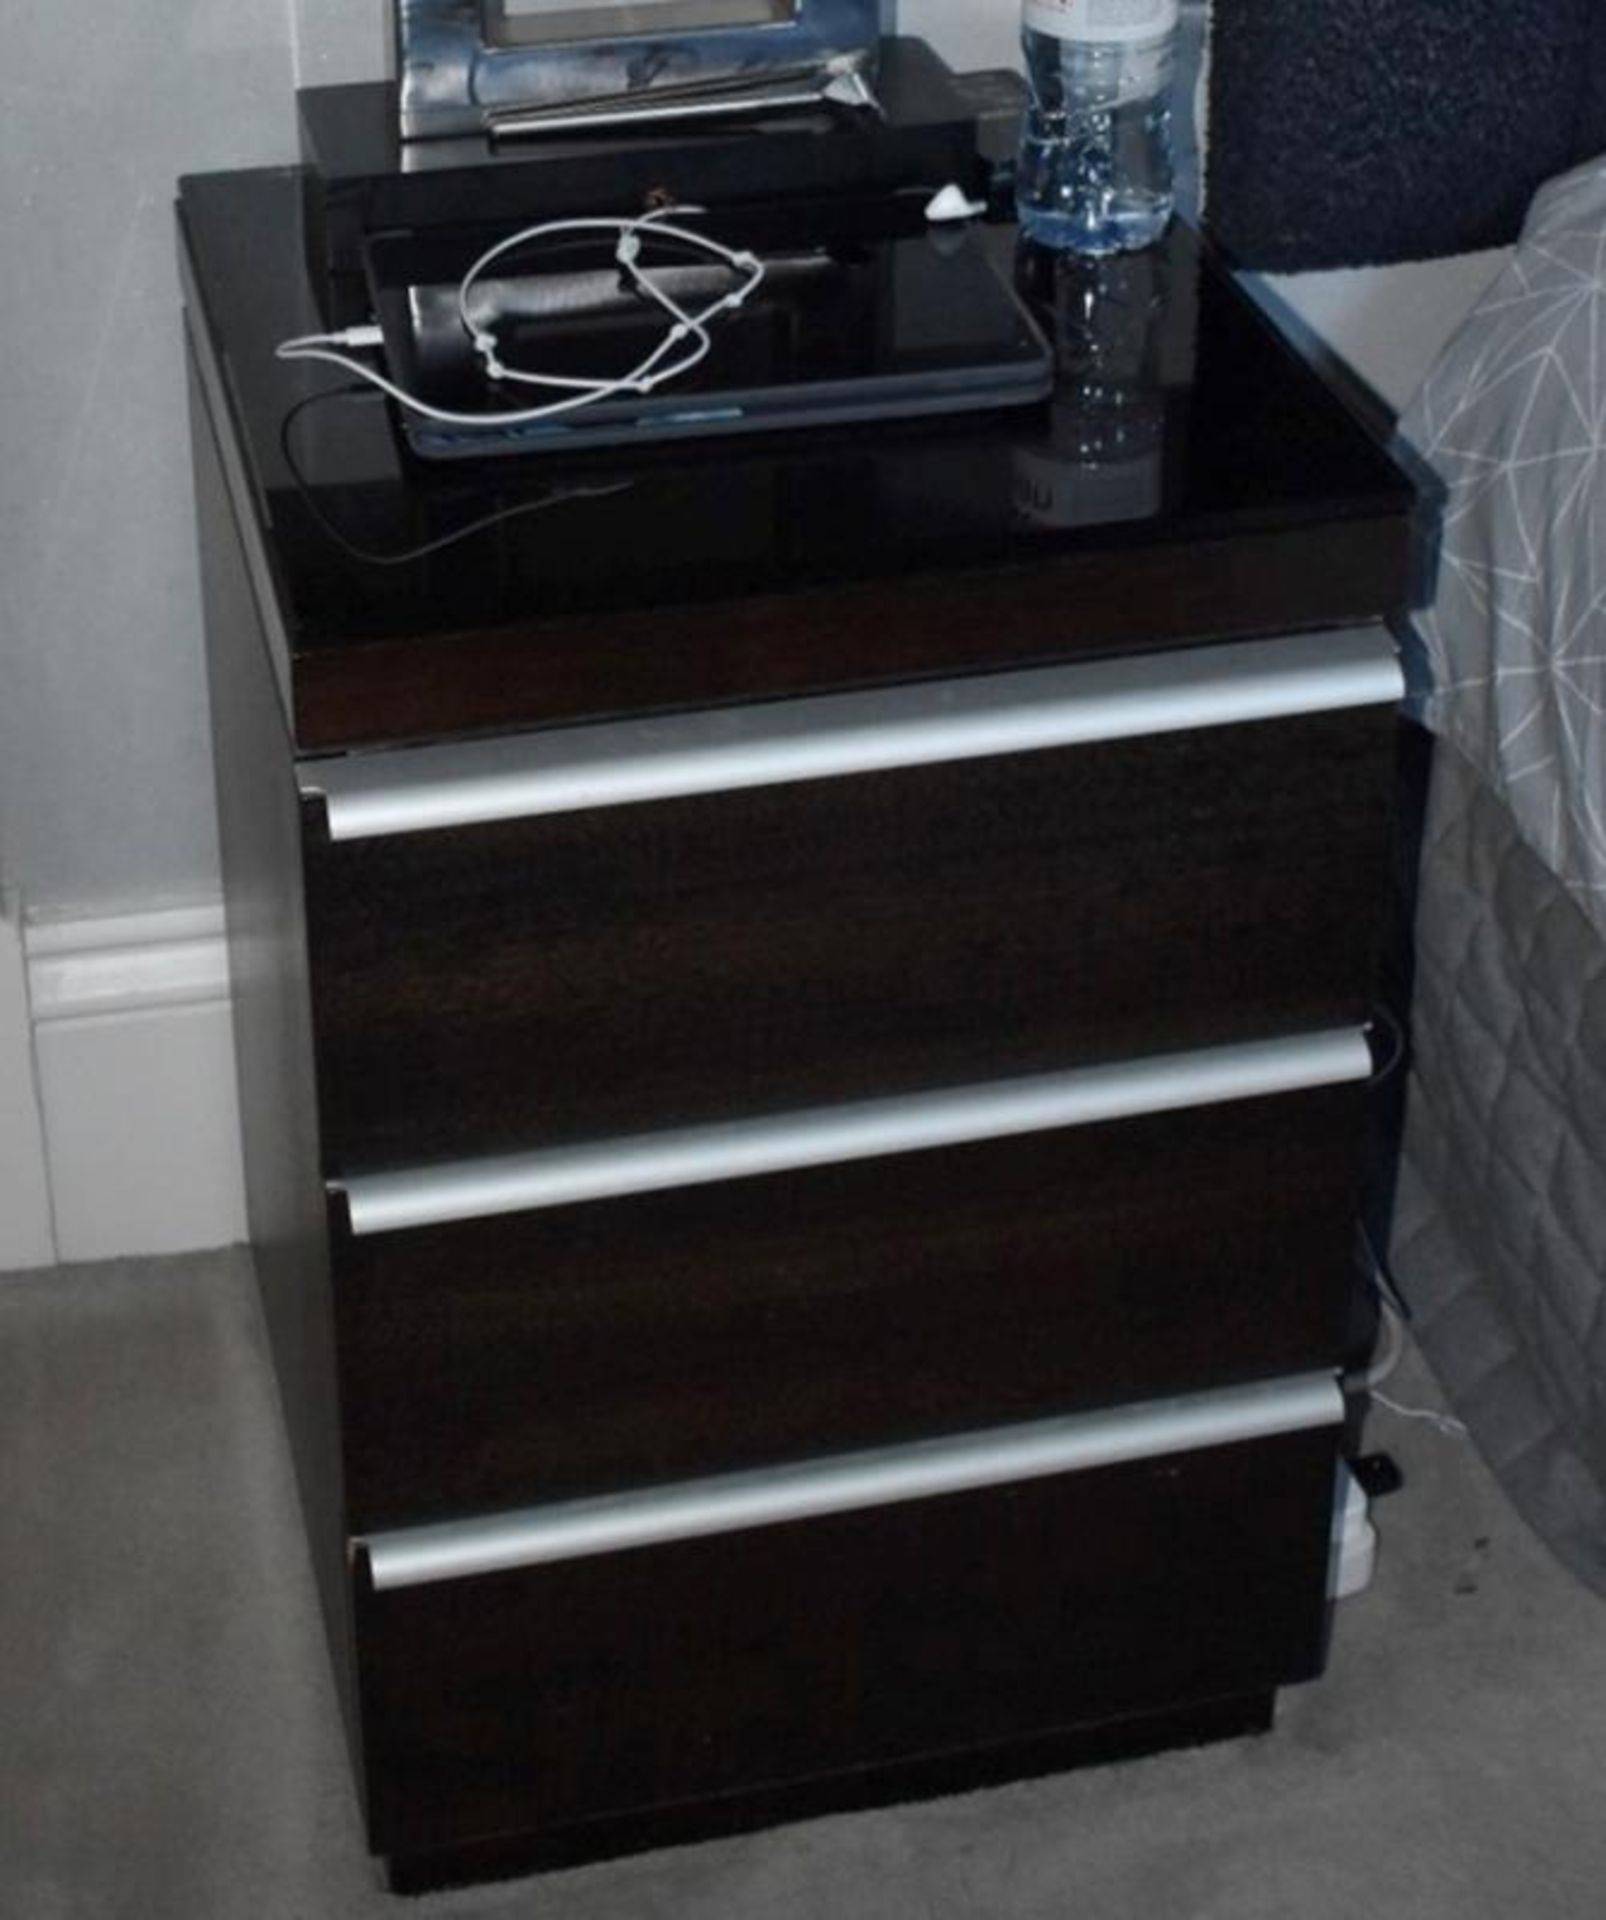 1 x Bedroom Furniture Set - Inc 2 x Bedside Units, Ottoman, TV Unit With Chest Of Drawers, And Desk - Image 2 of 6